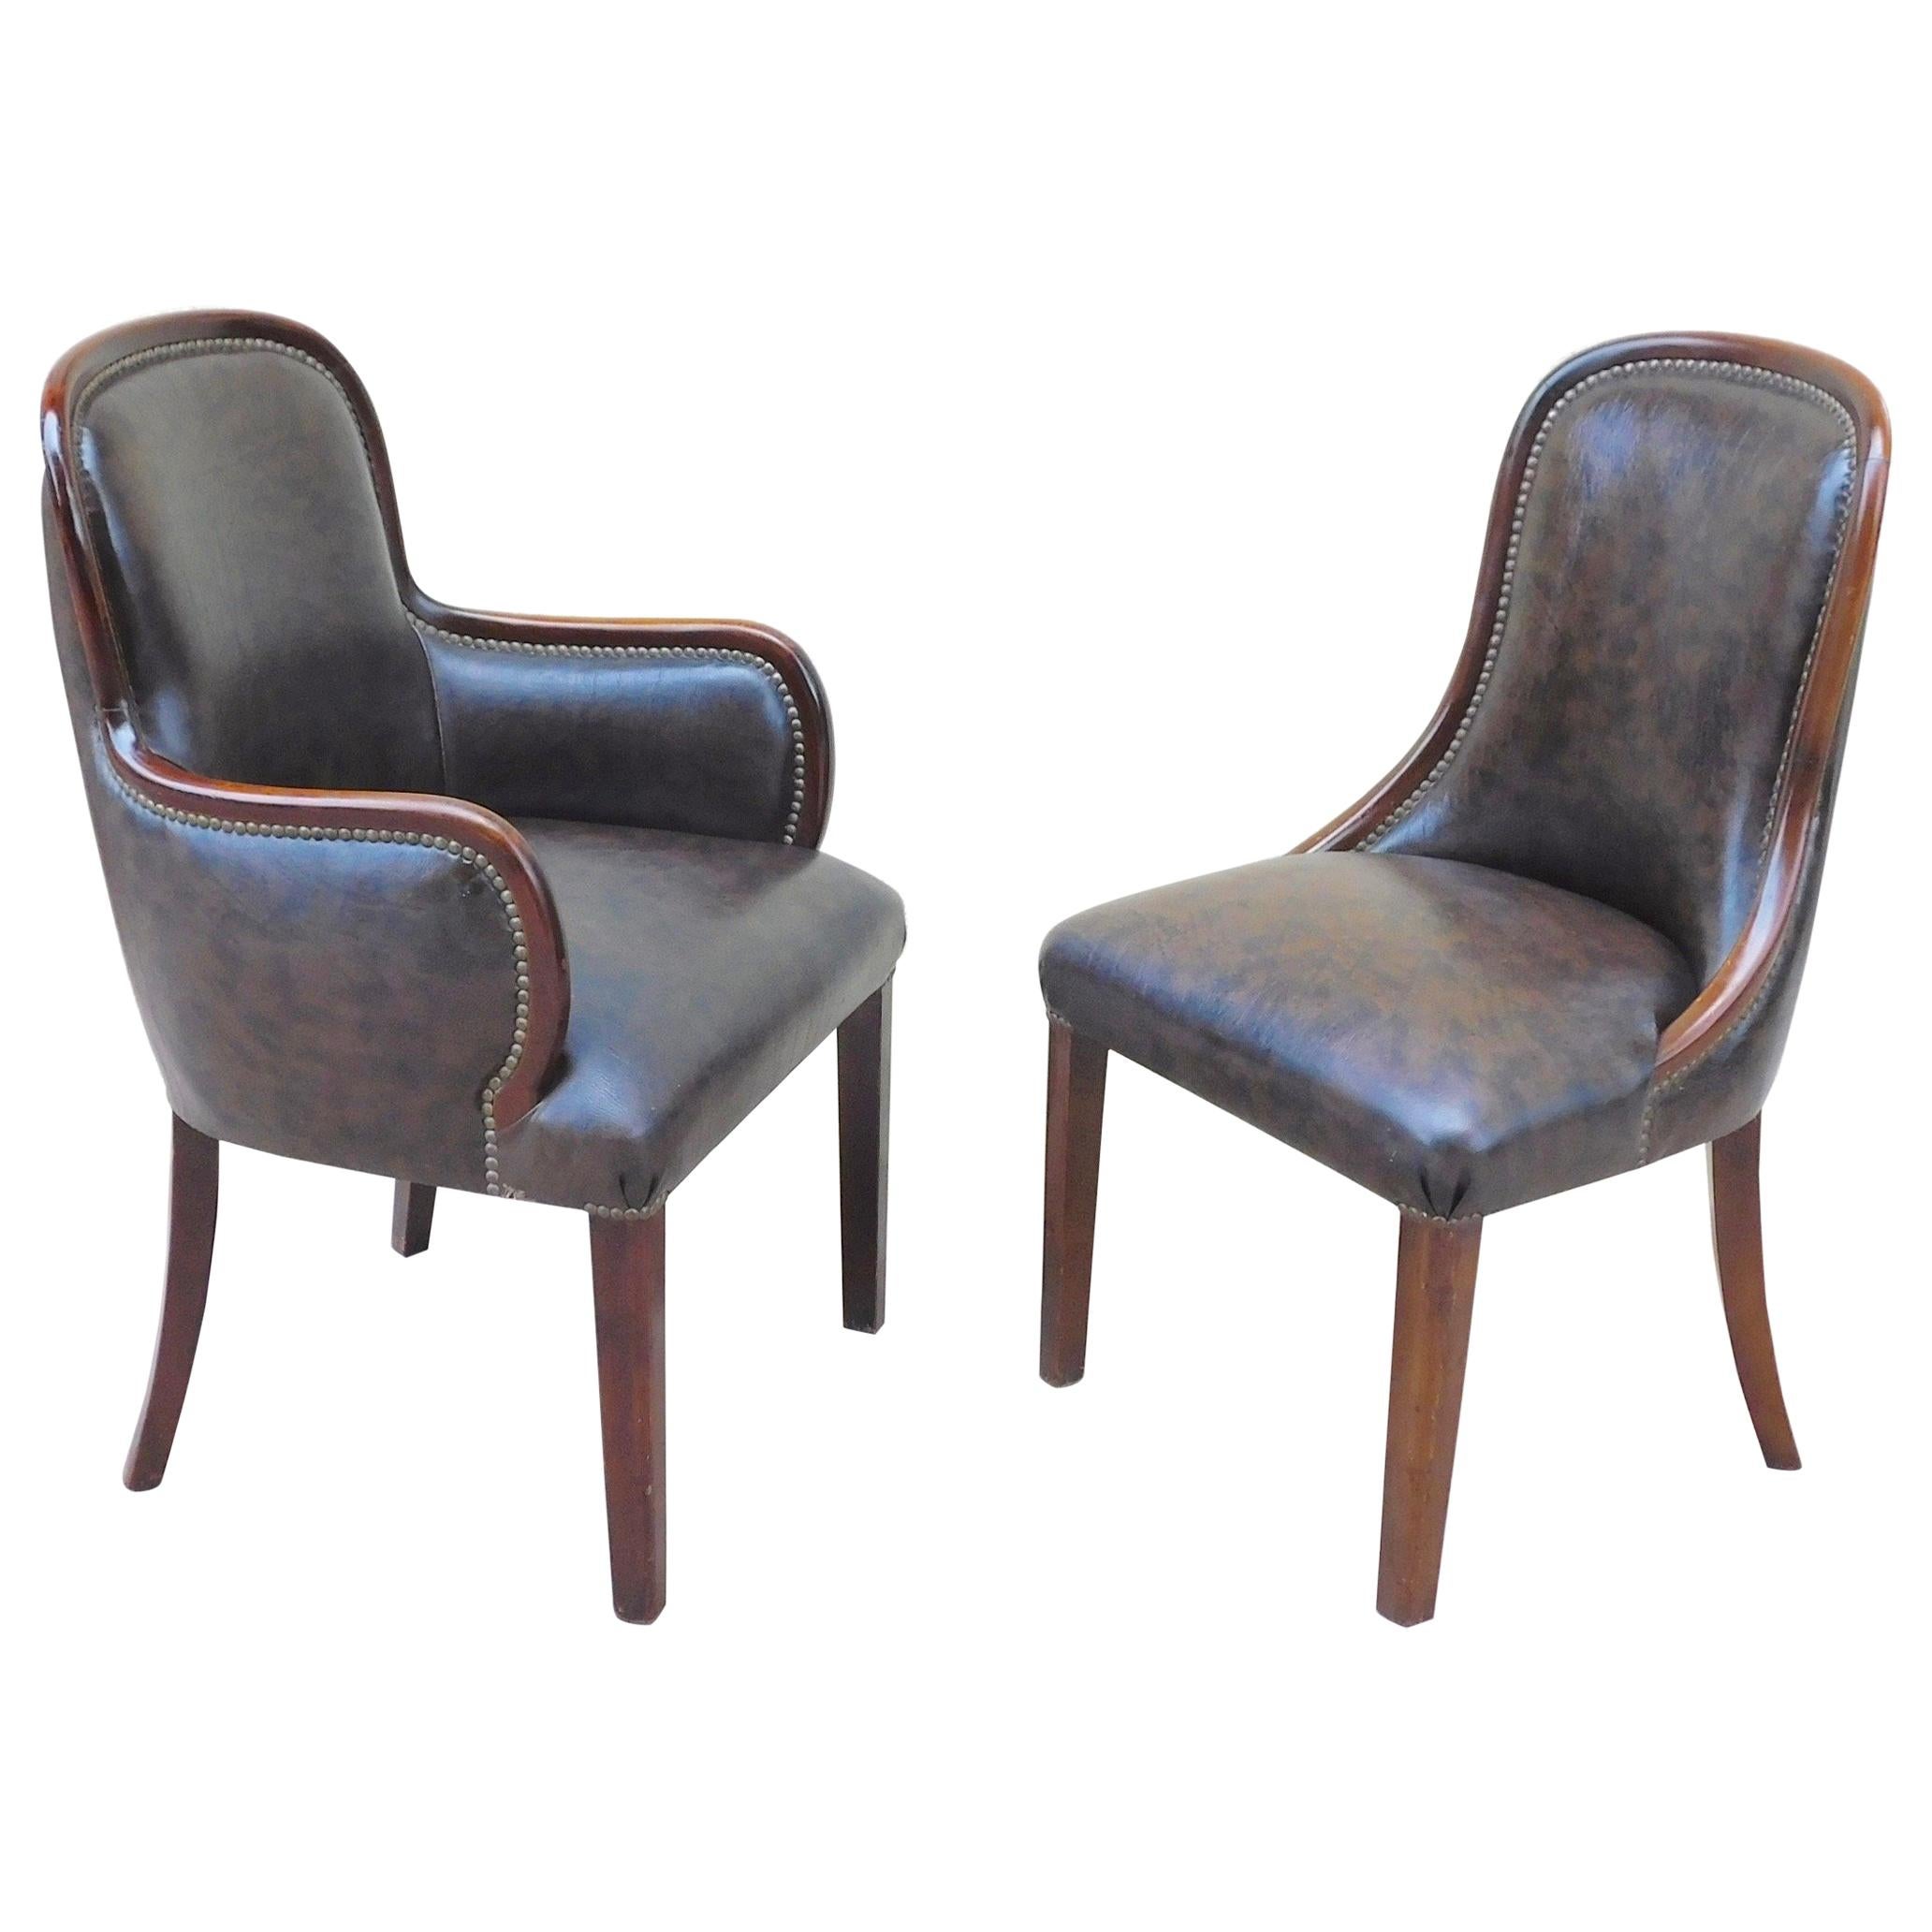 Set of Six Argentine Art Moderne Dining Chairs, circa 1940 For Sale